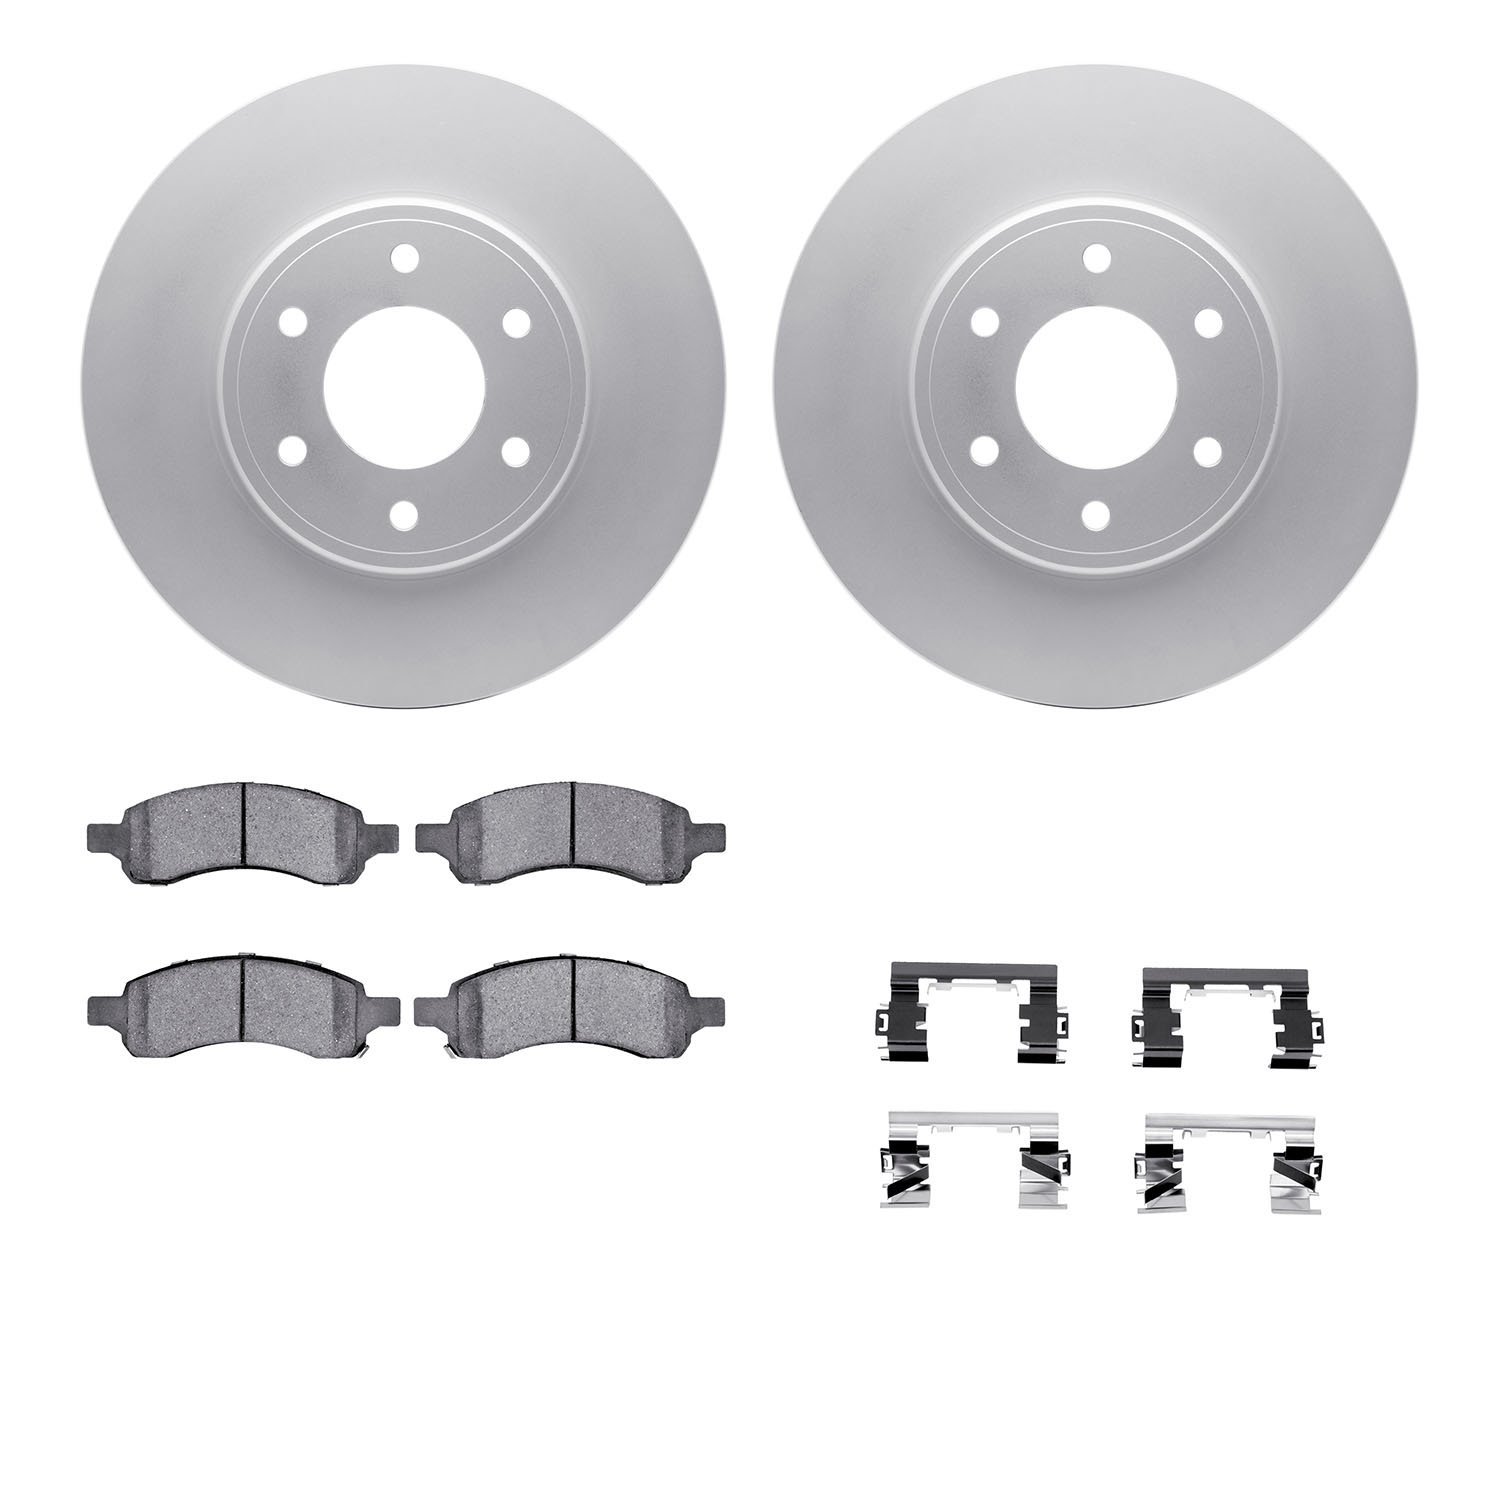 4412-47008 Geospec Brake Rotors with Ultimate-Duty Brake Pads & Hardware, 2006-2009 GM, Position: Front